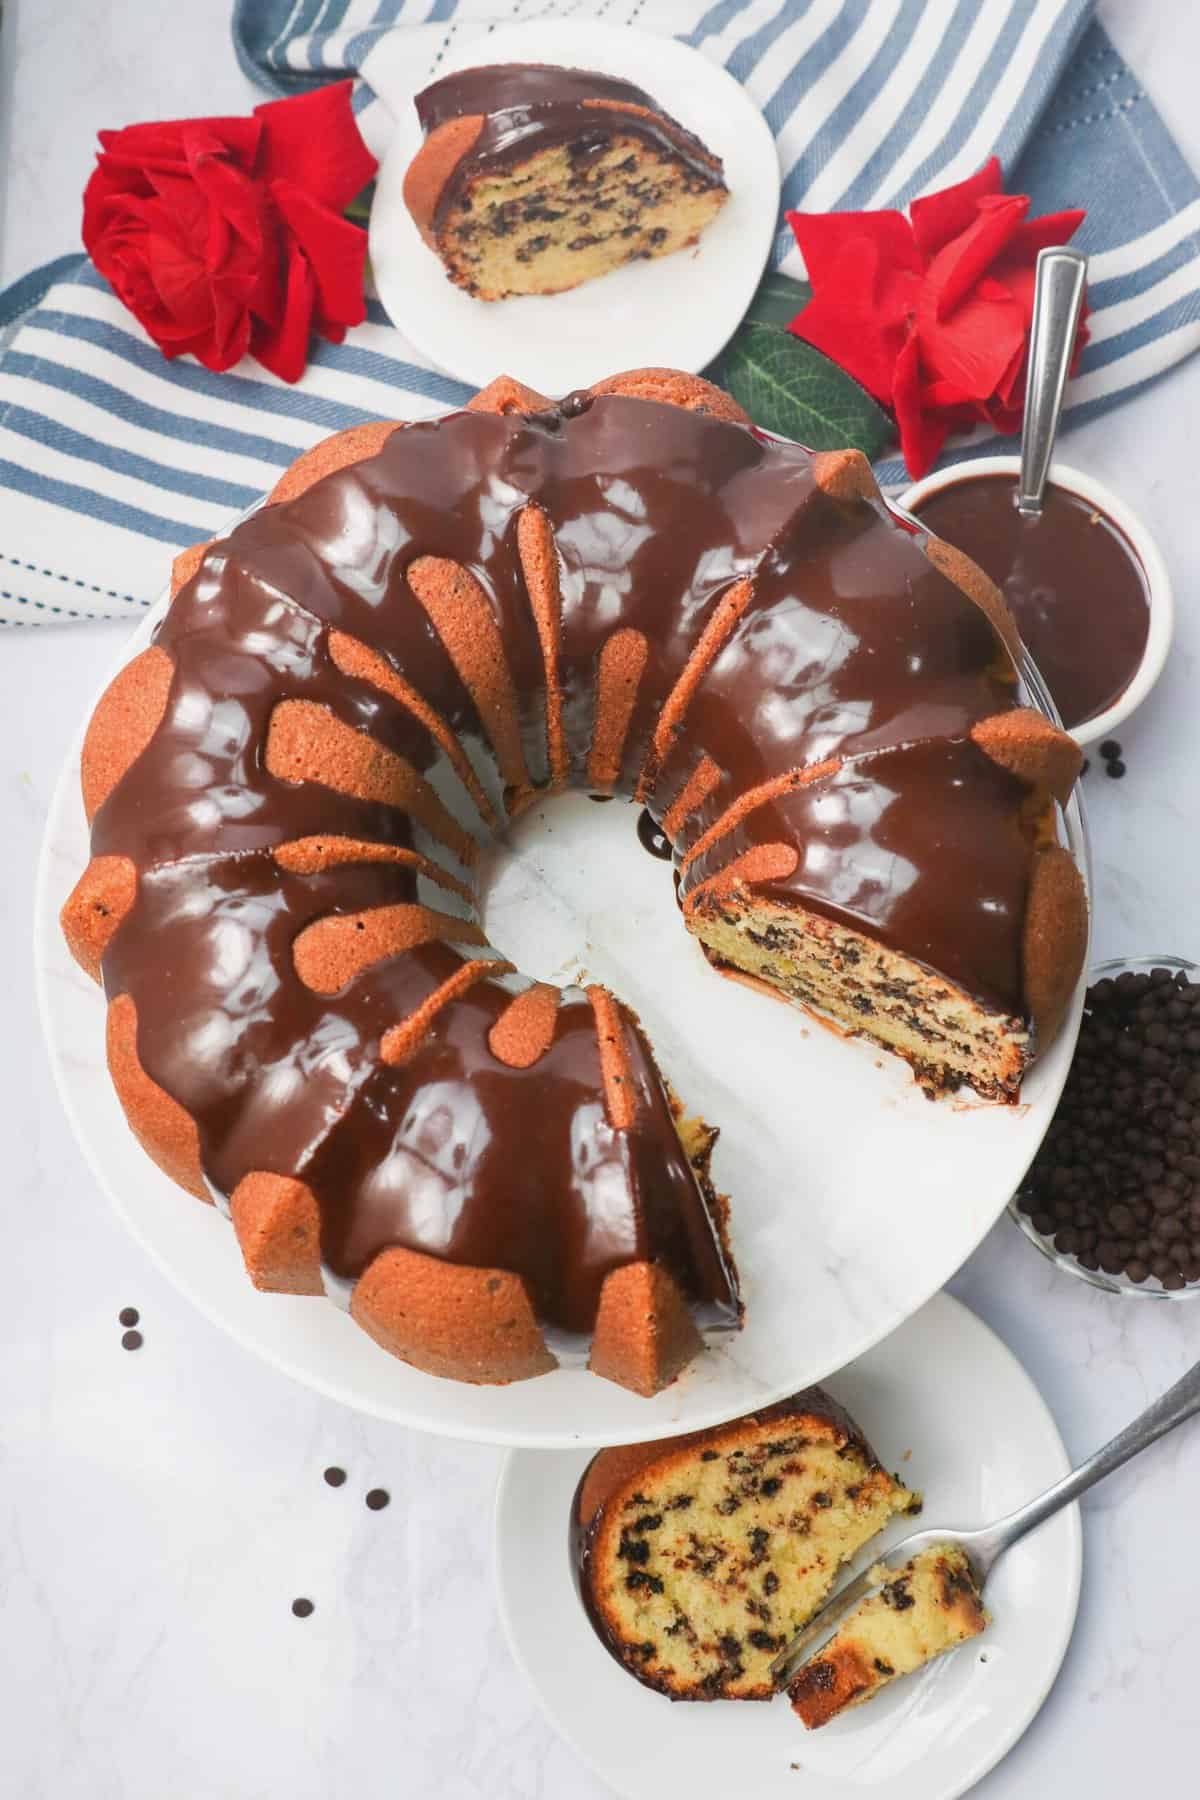 Serving up ridiculously delicious Chocolate Chip Bundt Cake